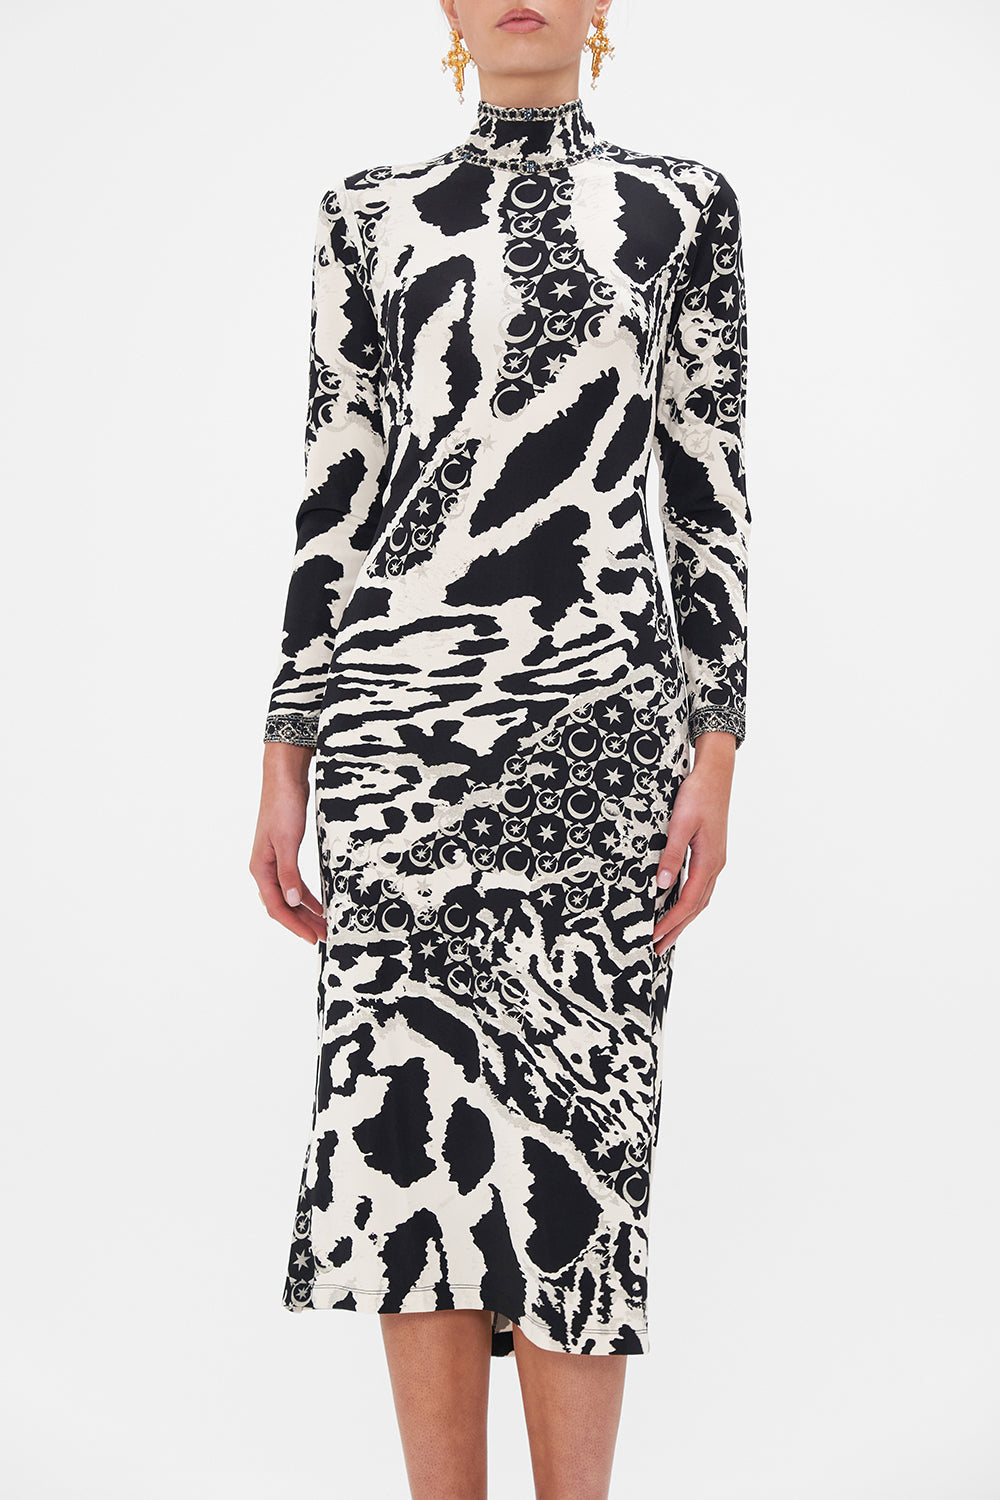 Crop view of model wearing CAMILLA black and white jersey midi dress in Feline Fantasy print